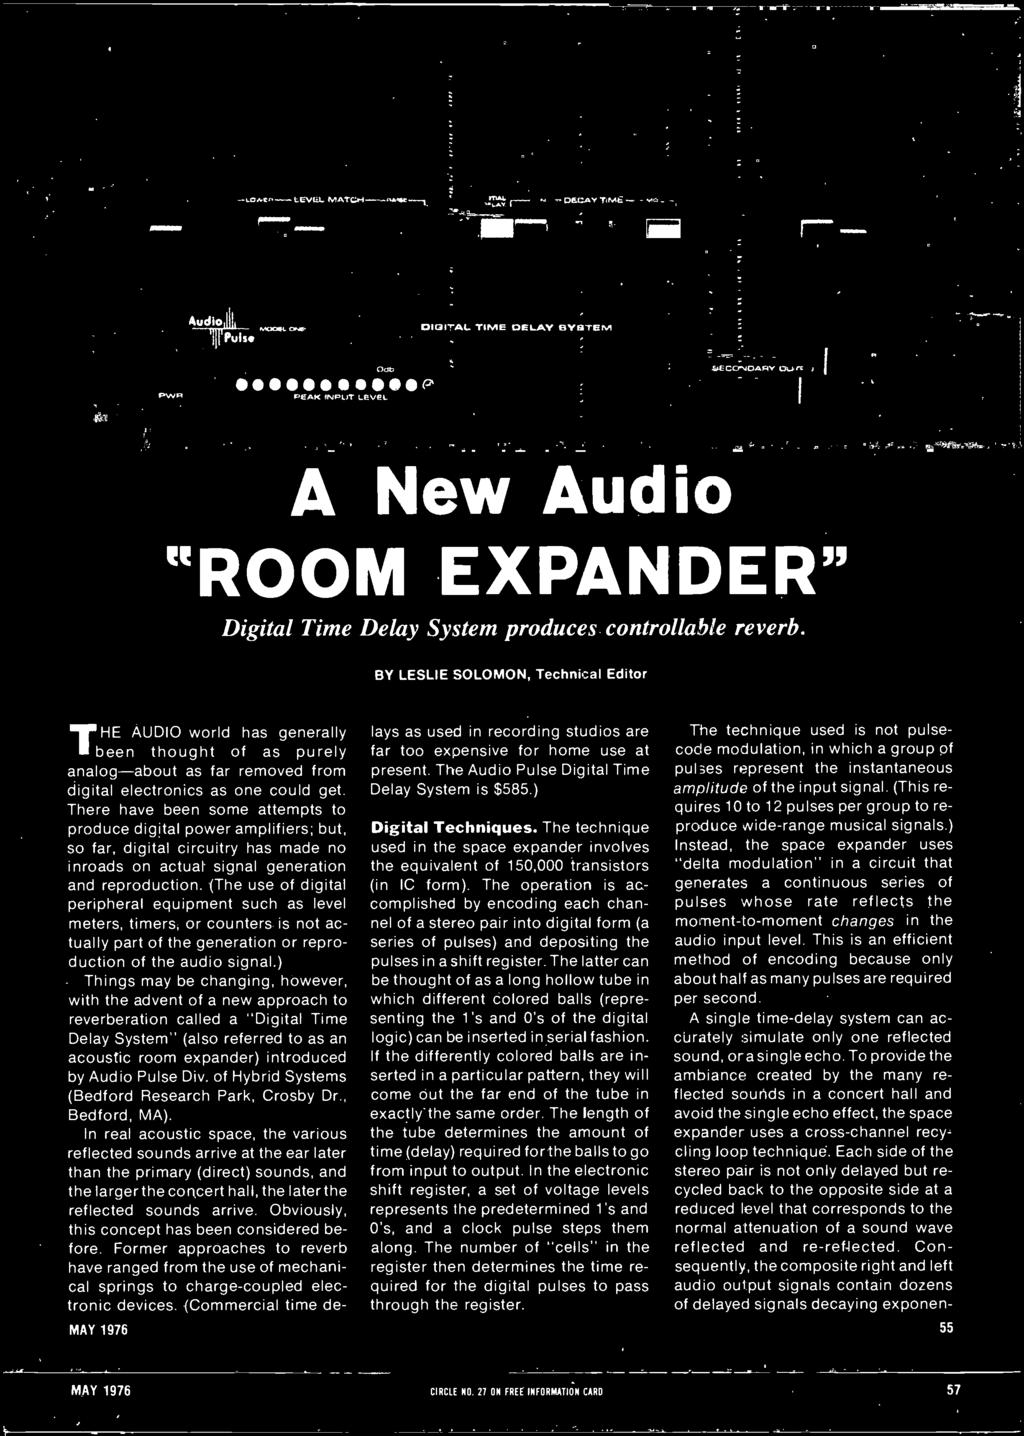 ) - Things may be changing, however, with the advent of a new approach to reverberation called a "Digital Time Delay System" (also referred to as an acoustic room expander) introduced by Audio Pulse